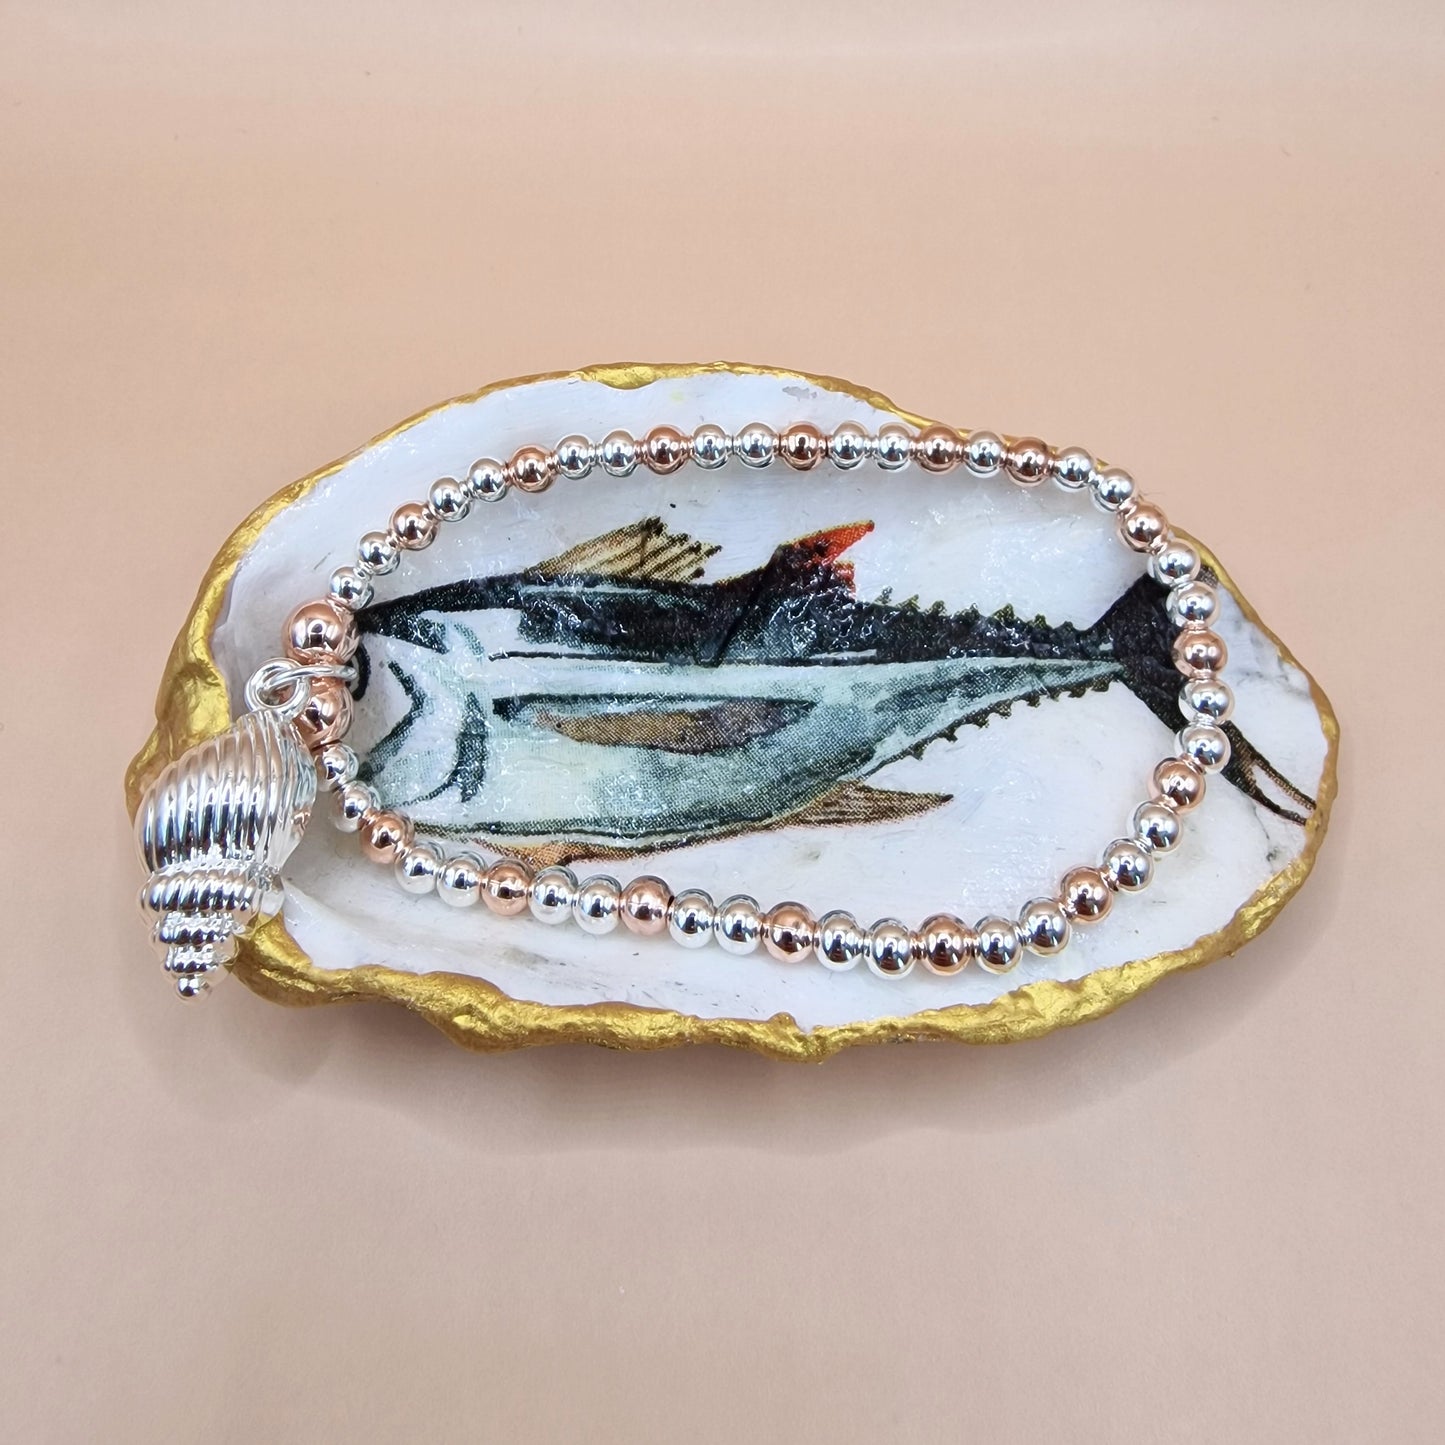 Trout Fish Oyster Shell Trinket Dish